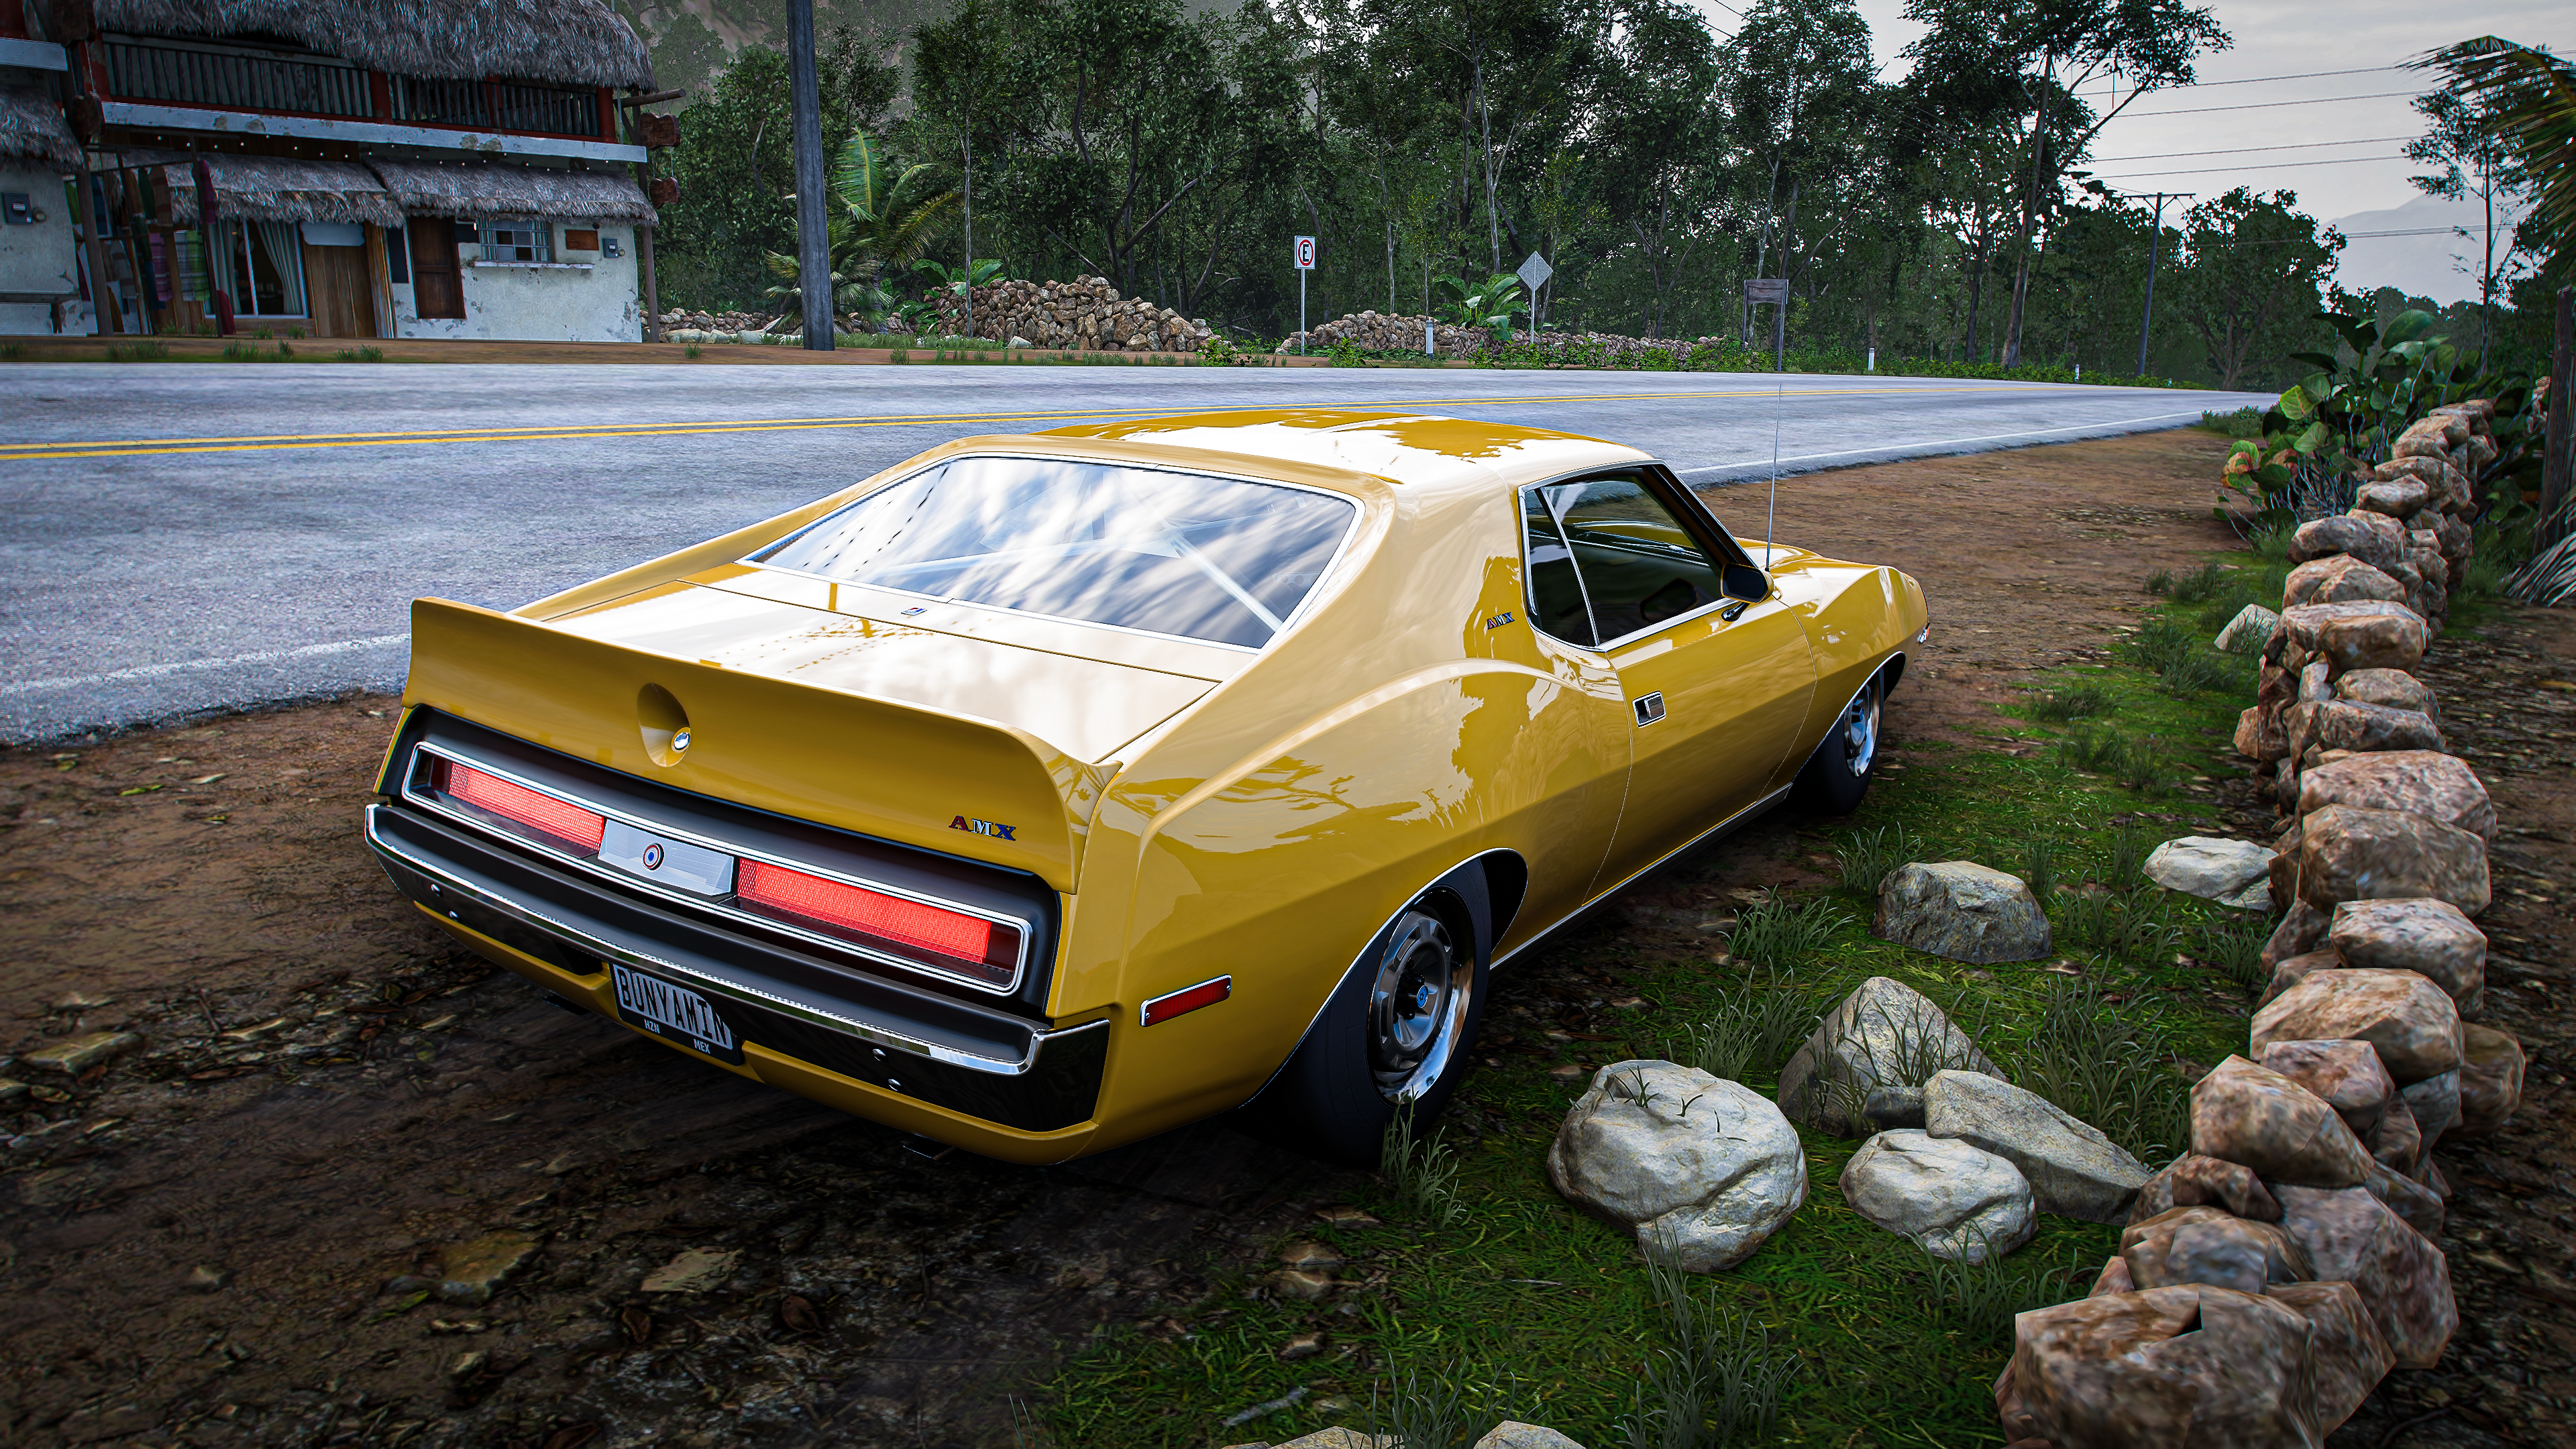 General 3840x2160 Forza Horizon 5 Forza Horizon Forza car vehicle video games video game art Mexican stones road yellow cars AMC Javelin licence plates PlaygroundGames muscle cars American cars